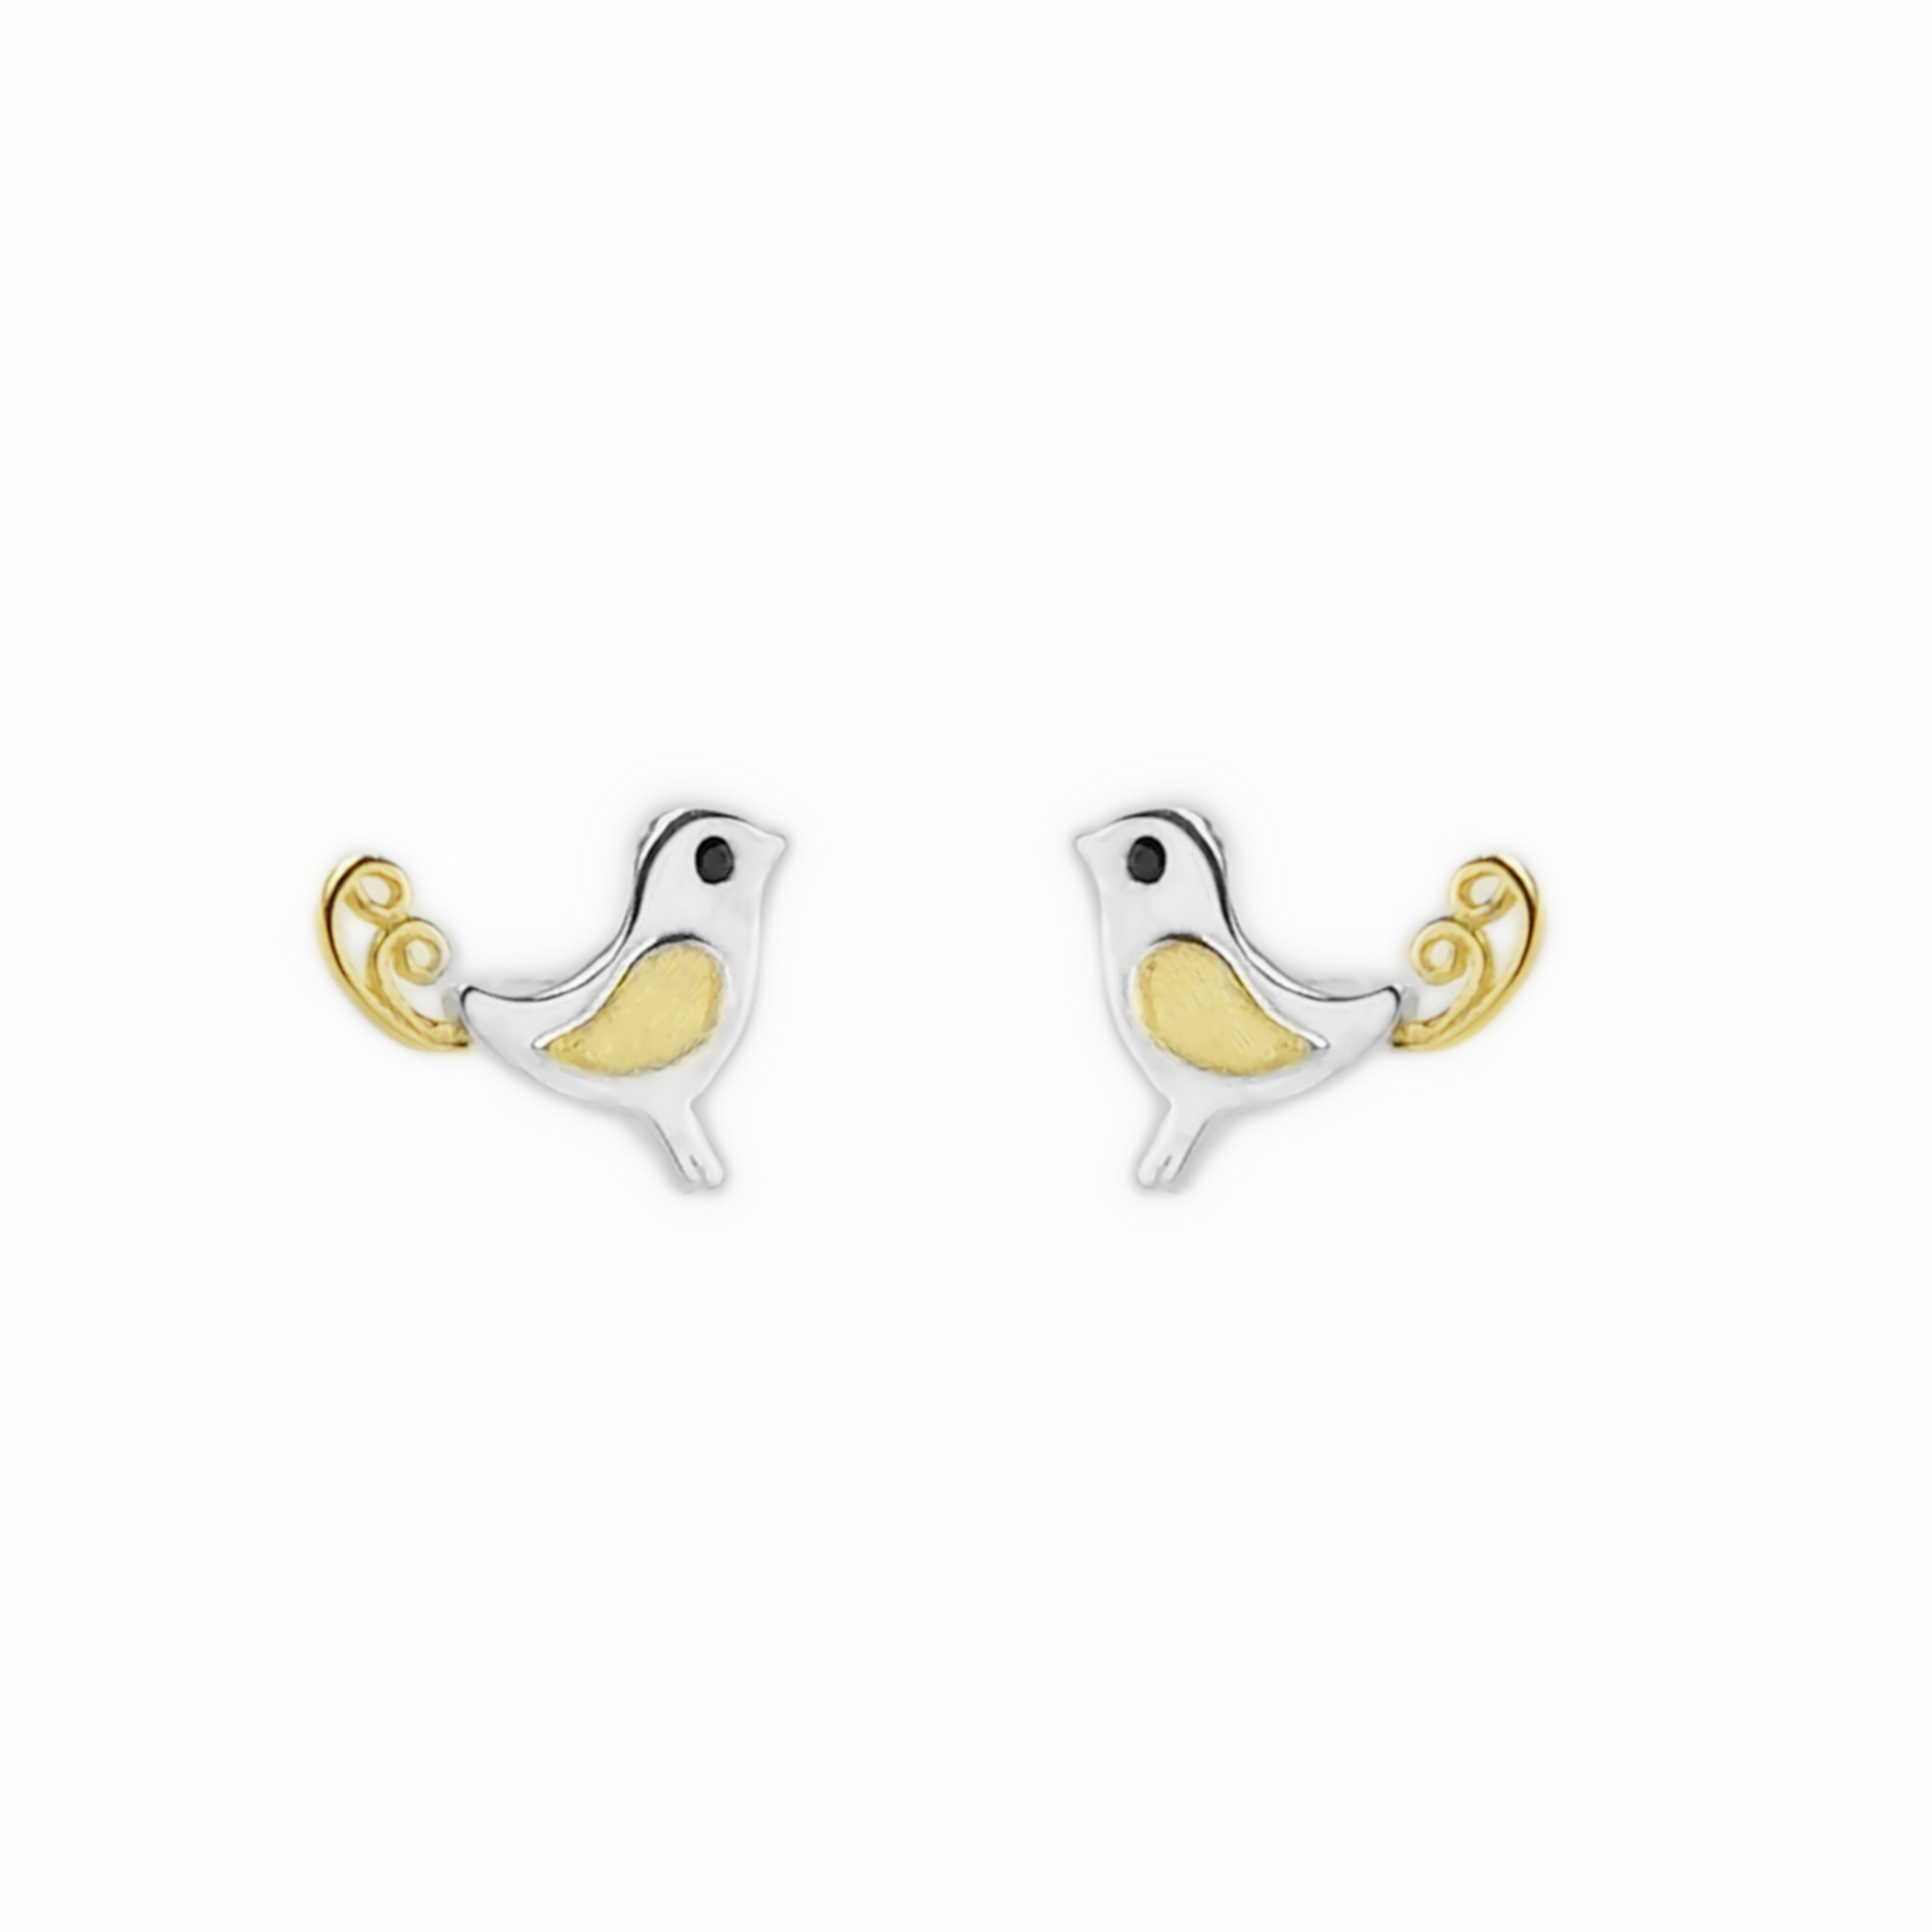 Gold on Sterling Silver Canary Birds with Grooved Wings Stud Earrings - sugarkittenlondon